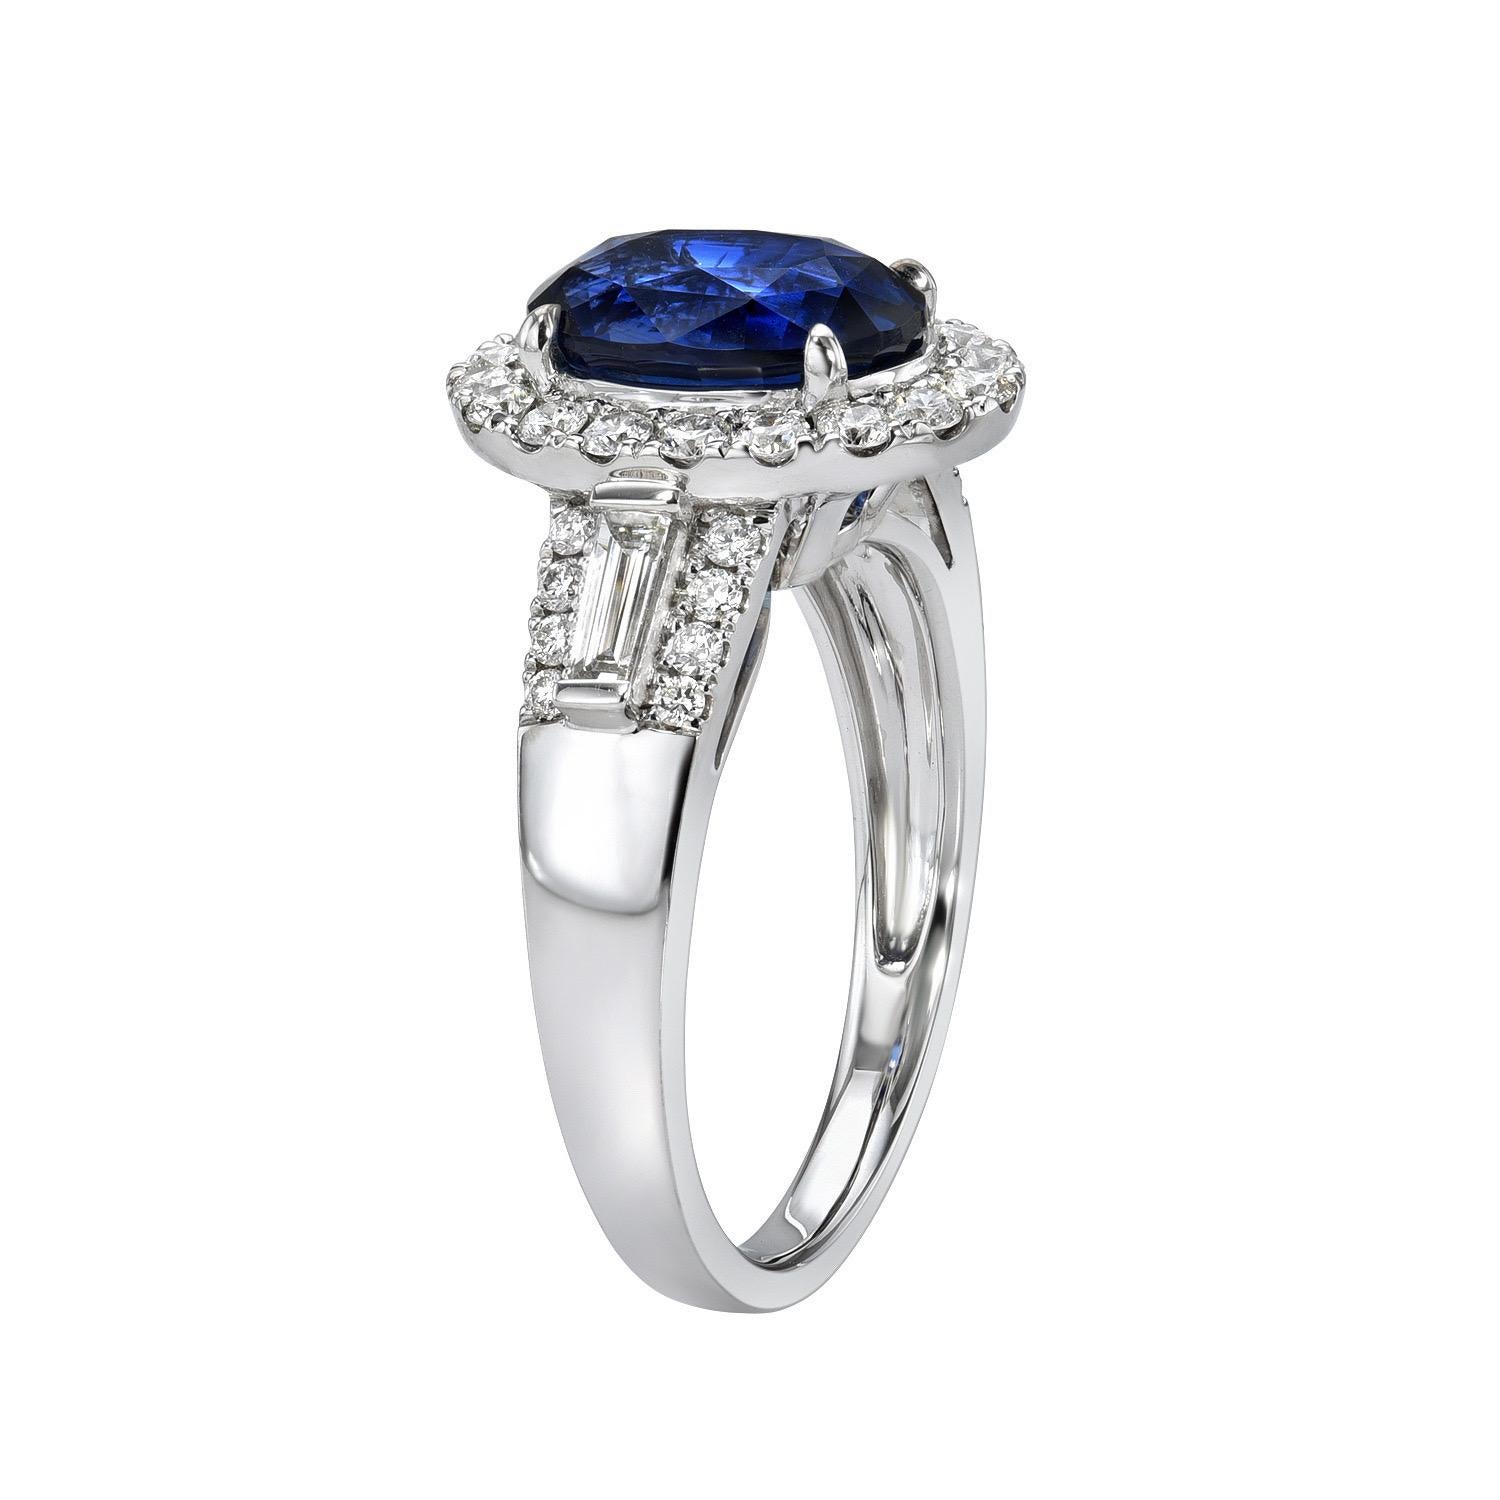 Contemporary Sapphire Ring 3.05 Carat Oval Royal Blue For Sale